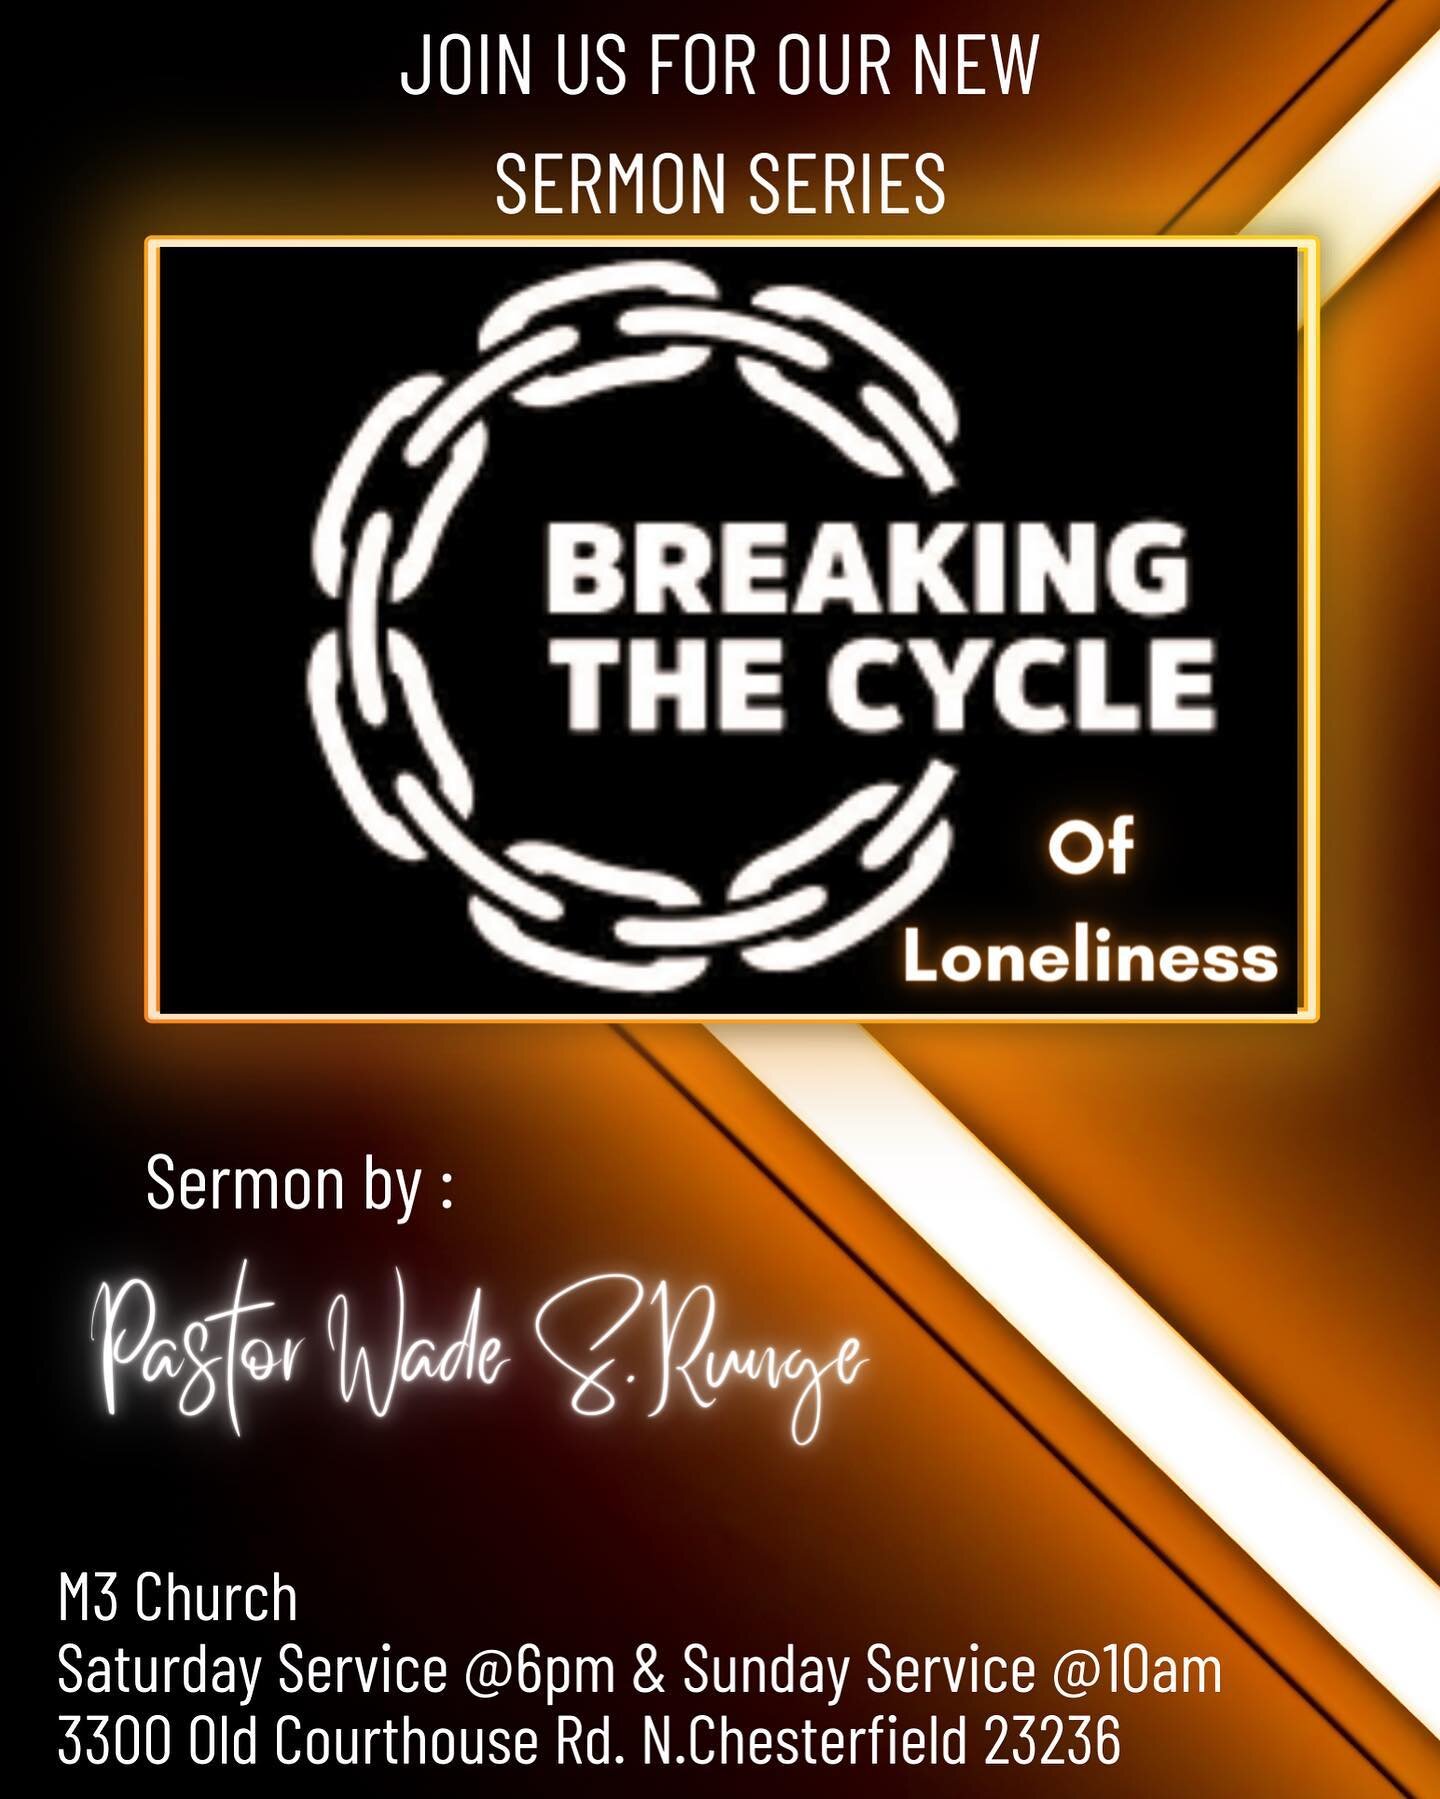 Come join us today for worship at 10am. New sermon series!